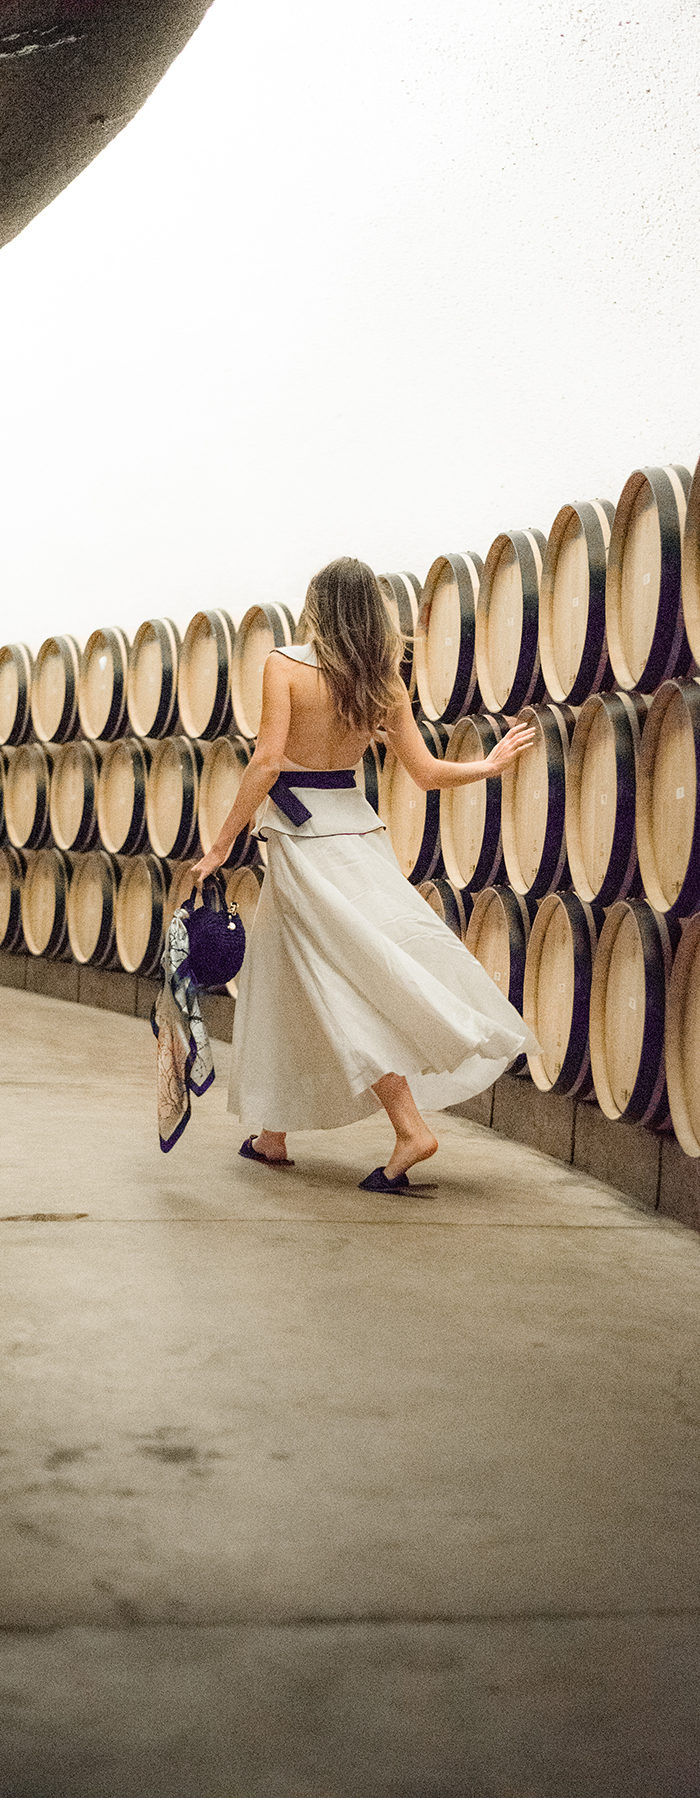 Alyssa Campanella of The A List blog visits Cade Winery with Visit Napa Valley in Calistoga wearing Gul Hurgel